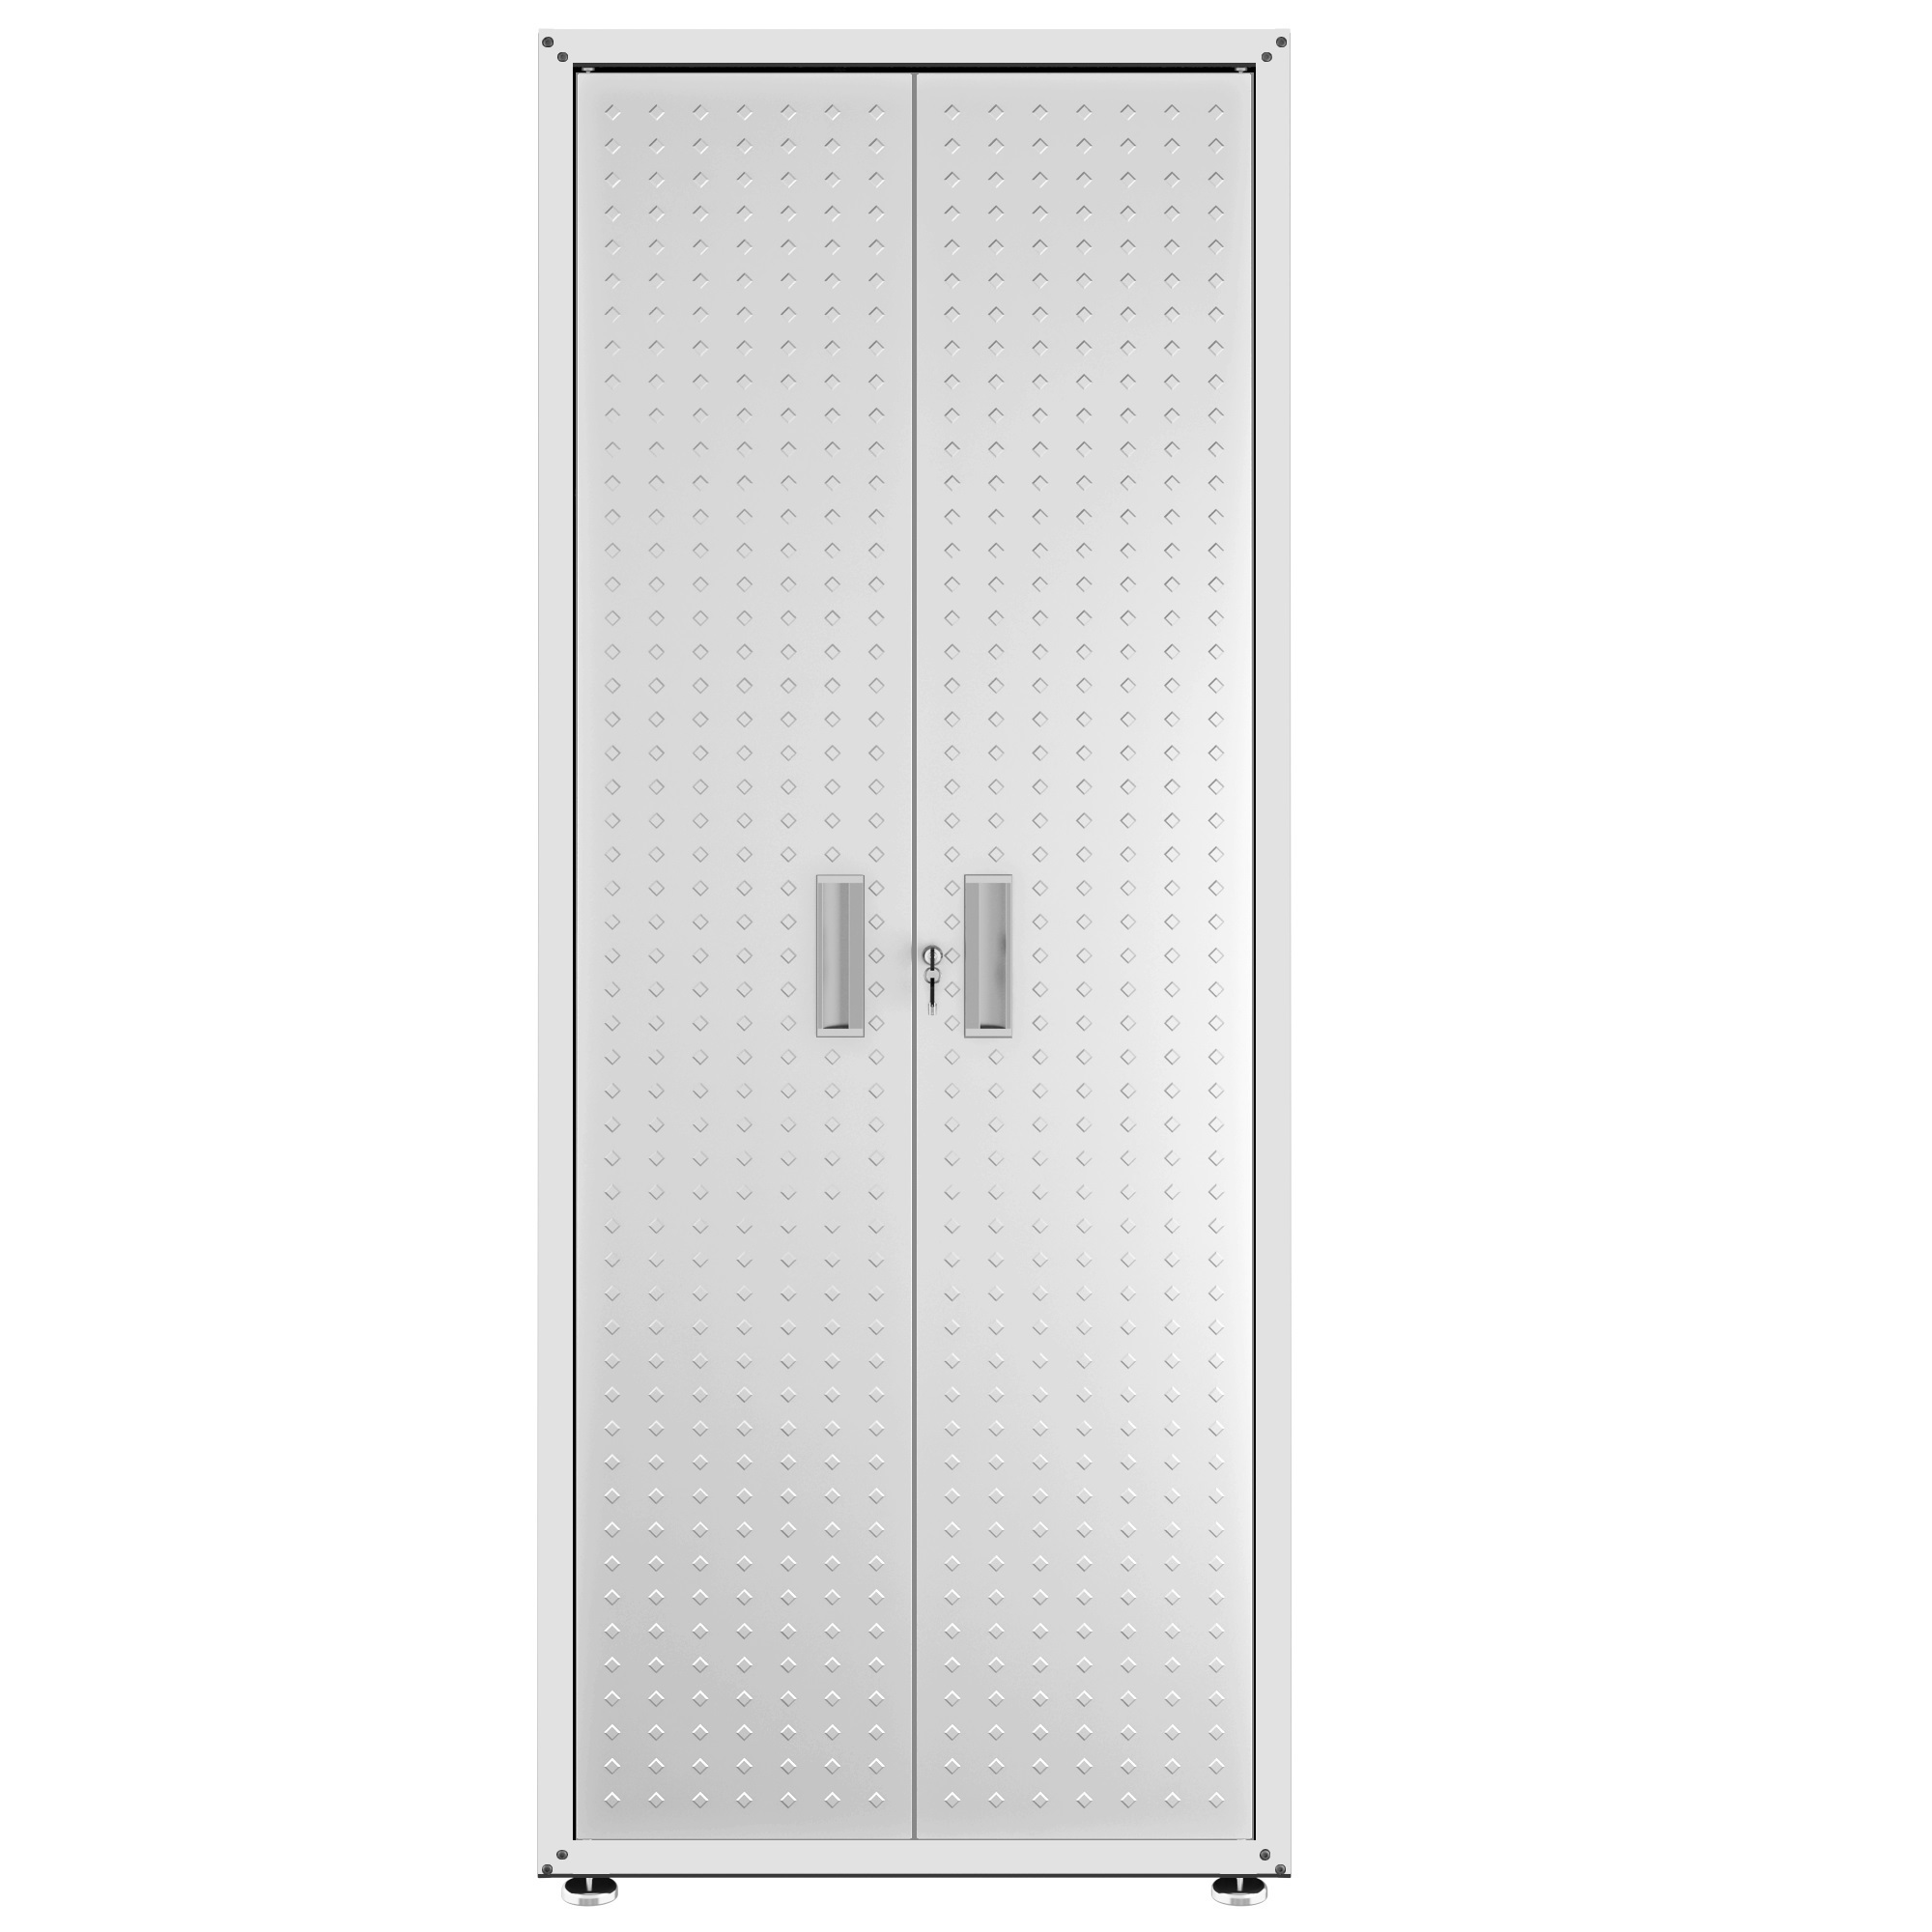 Manhattan Comfort, Fortress Tall Garage Cabinet in White, Height 74.8 in, Width 30.3 in, Color White, Model 1GMCF